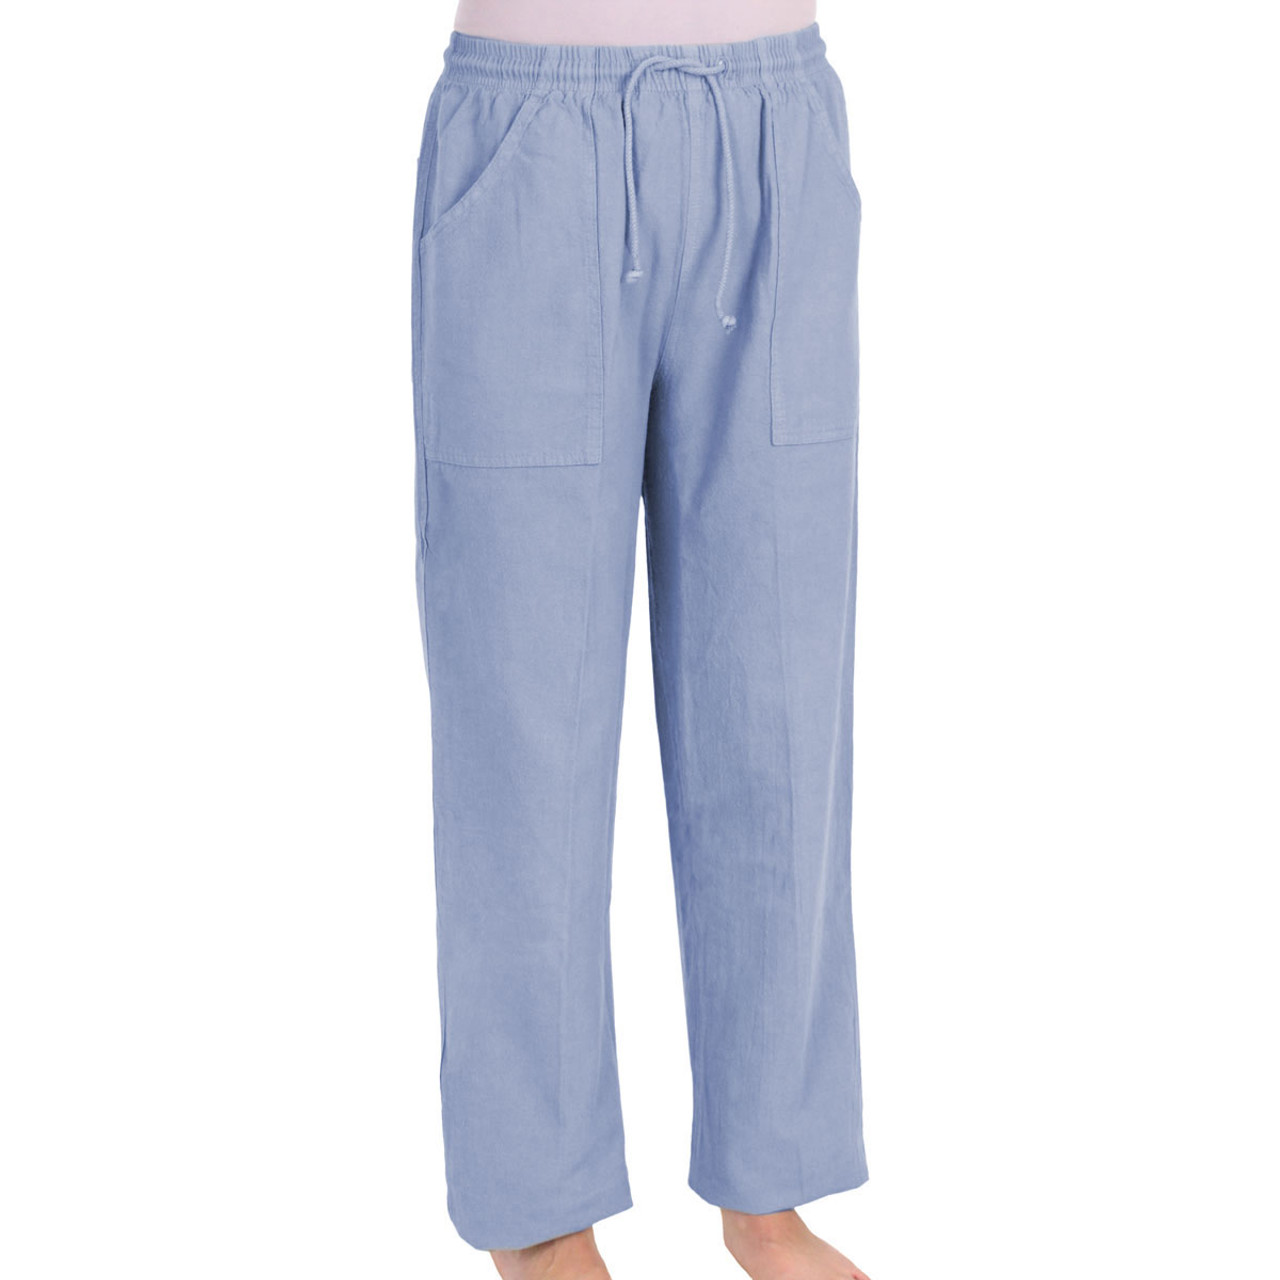 Cotton Pants in Light Weight Carefree Crinkle Cotton | Cotton Pants by ...